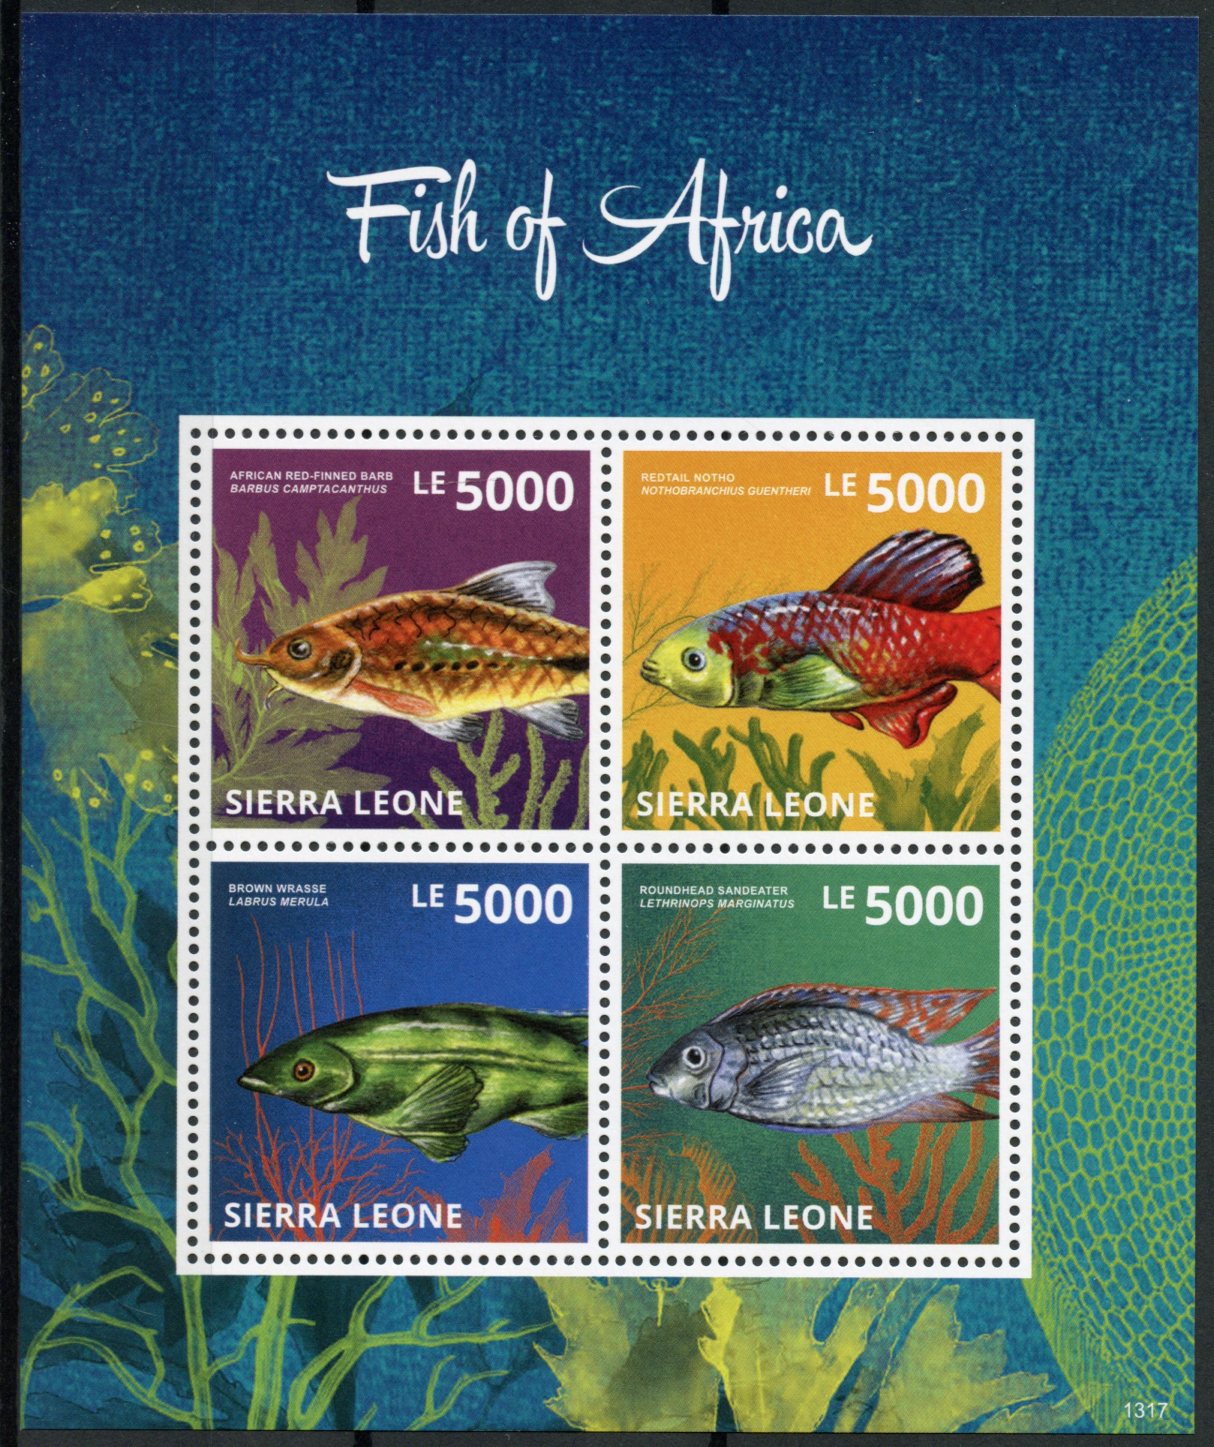 Sierra Leone 2013 MNH Fish of Africa 4v M/S Barb Redtail Notho Wrasse Sandeater